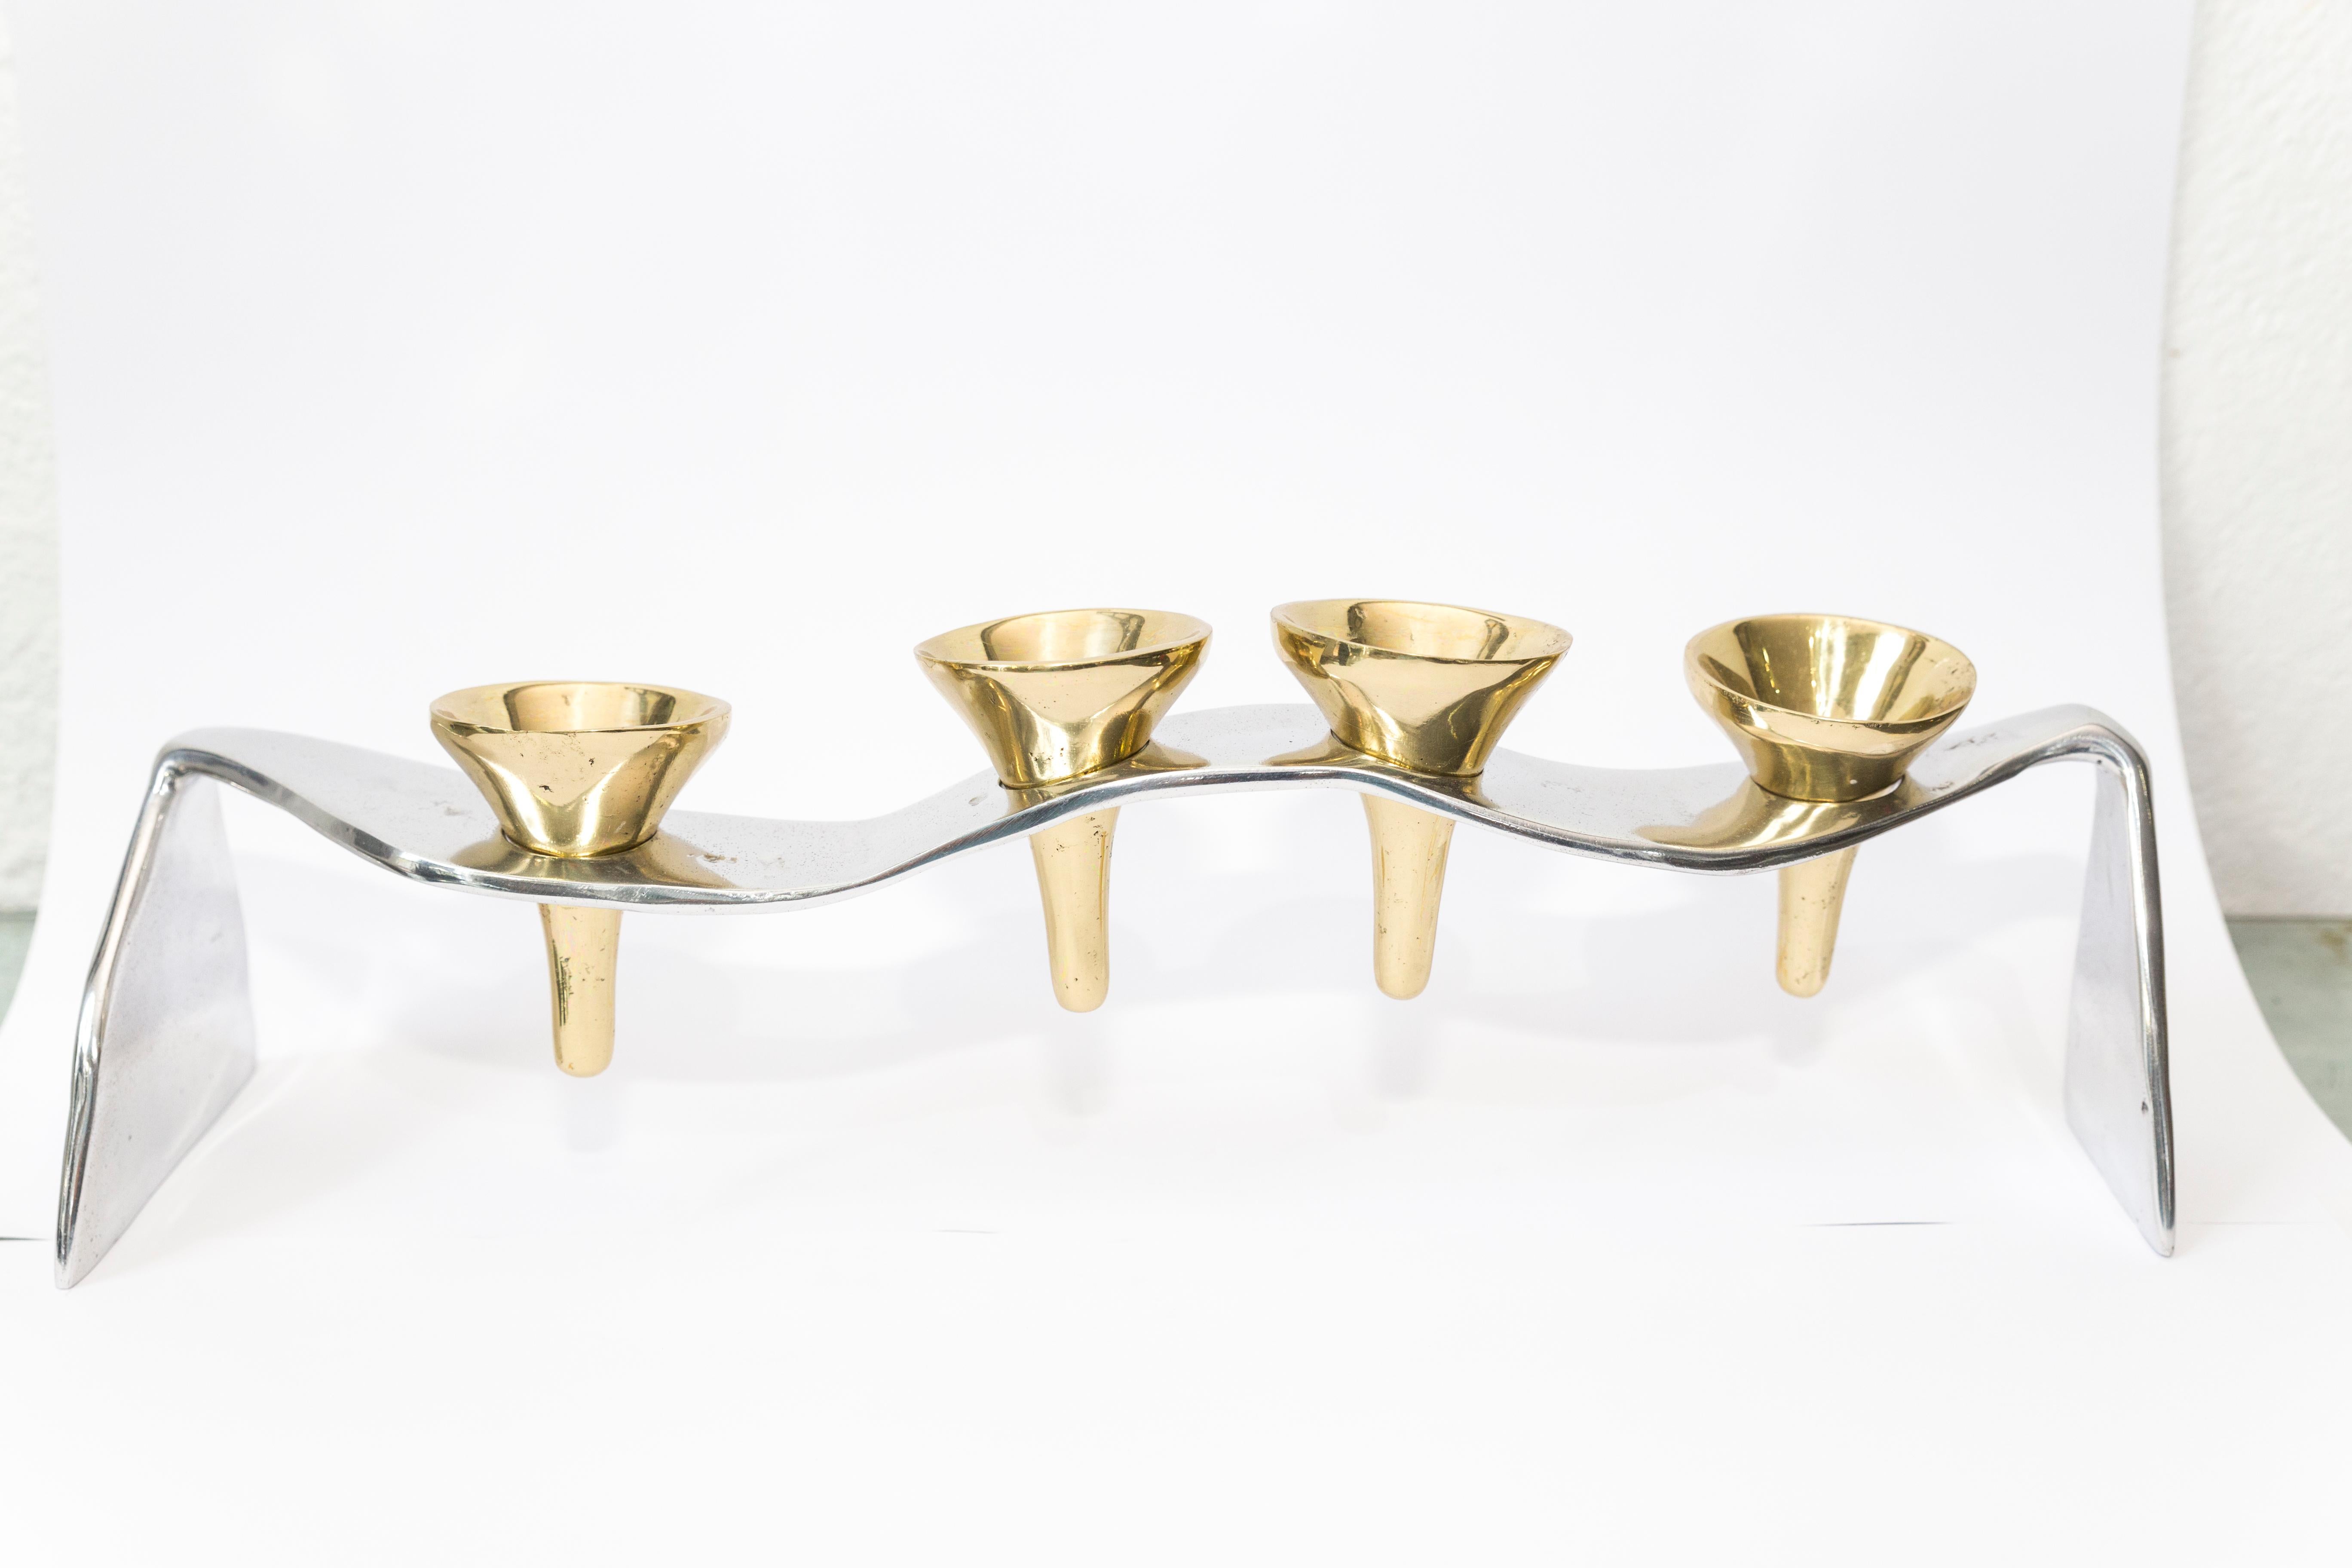 Cast Candelabra Sinuoso 4 Velas made of solid Brass and Aluminium Handmade For Sale